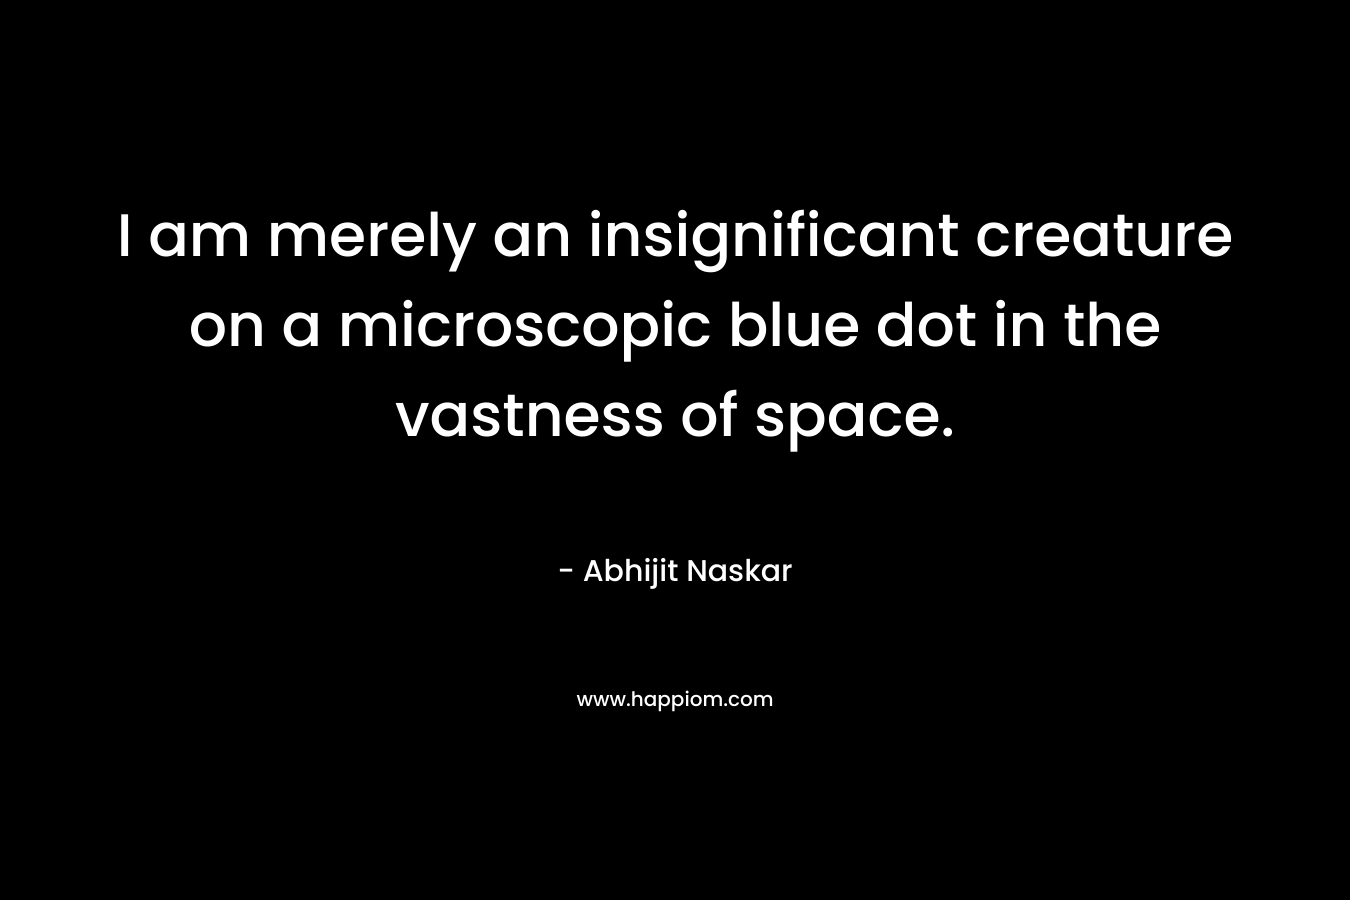 I am merely an insignificant creature on a microscopic blue dot in the vastness of space.